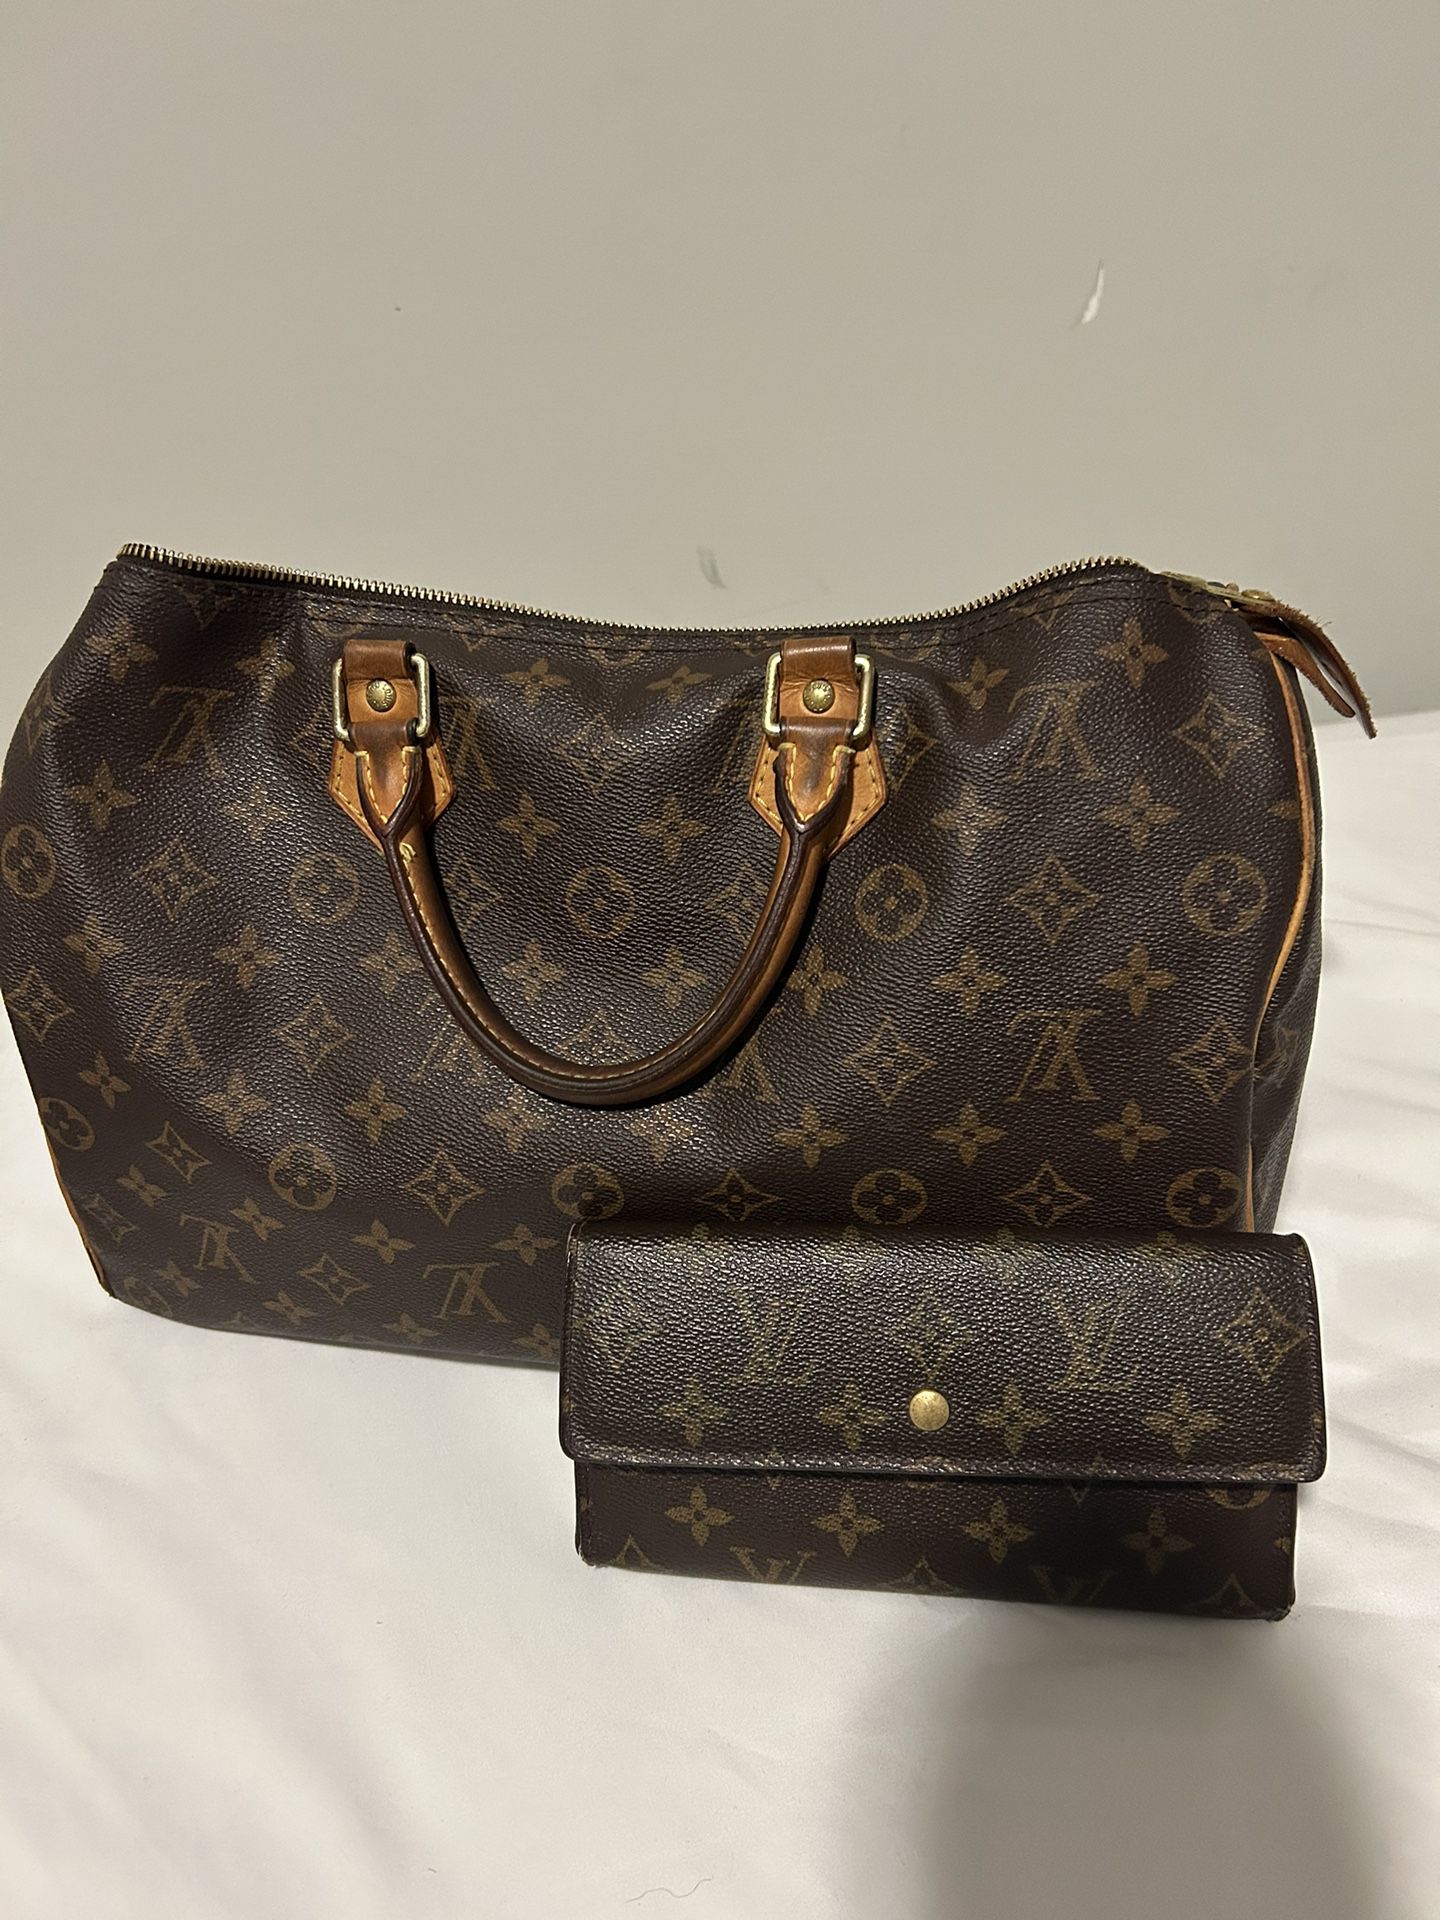 Louis Vuitton Vintage Speedy 40 With Matching Wallet for Sale in